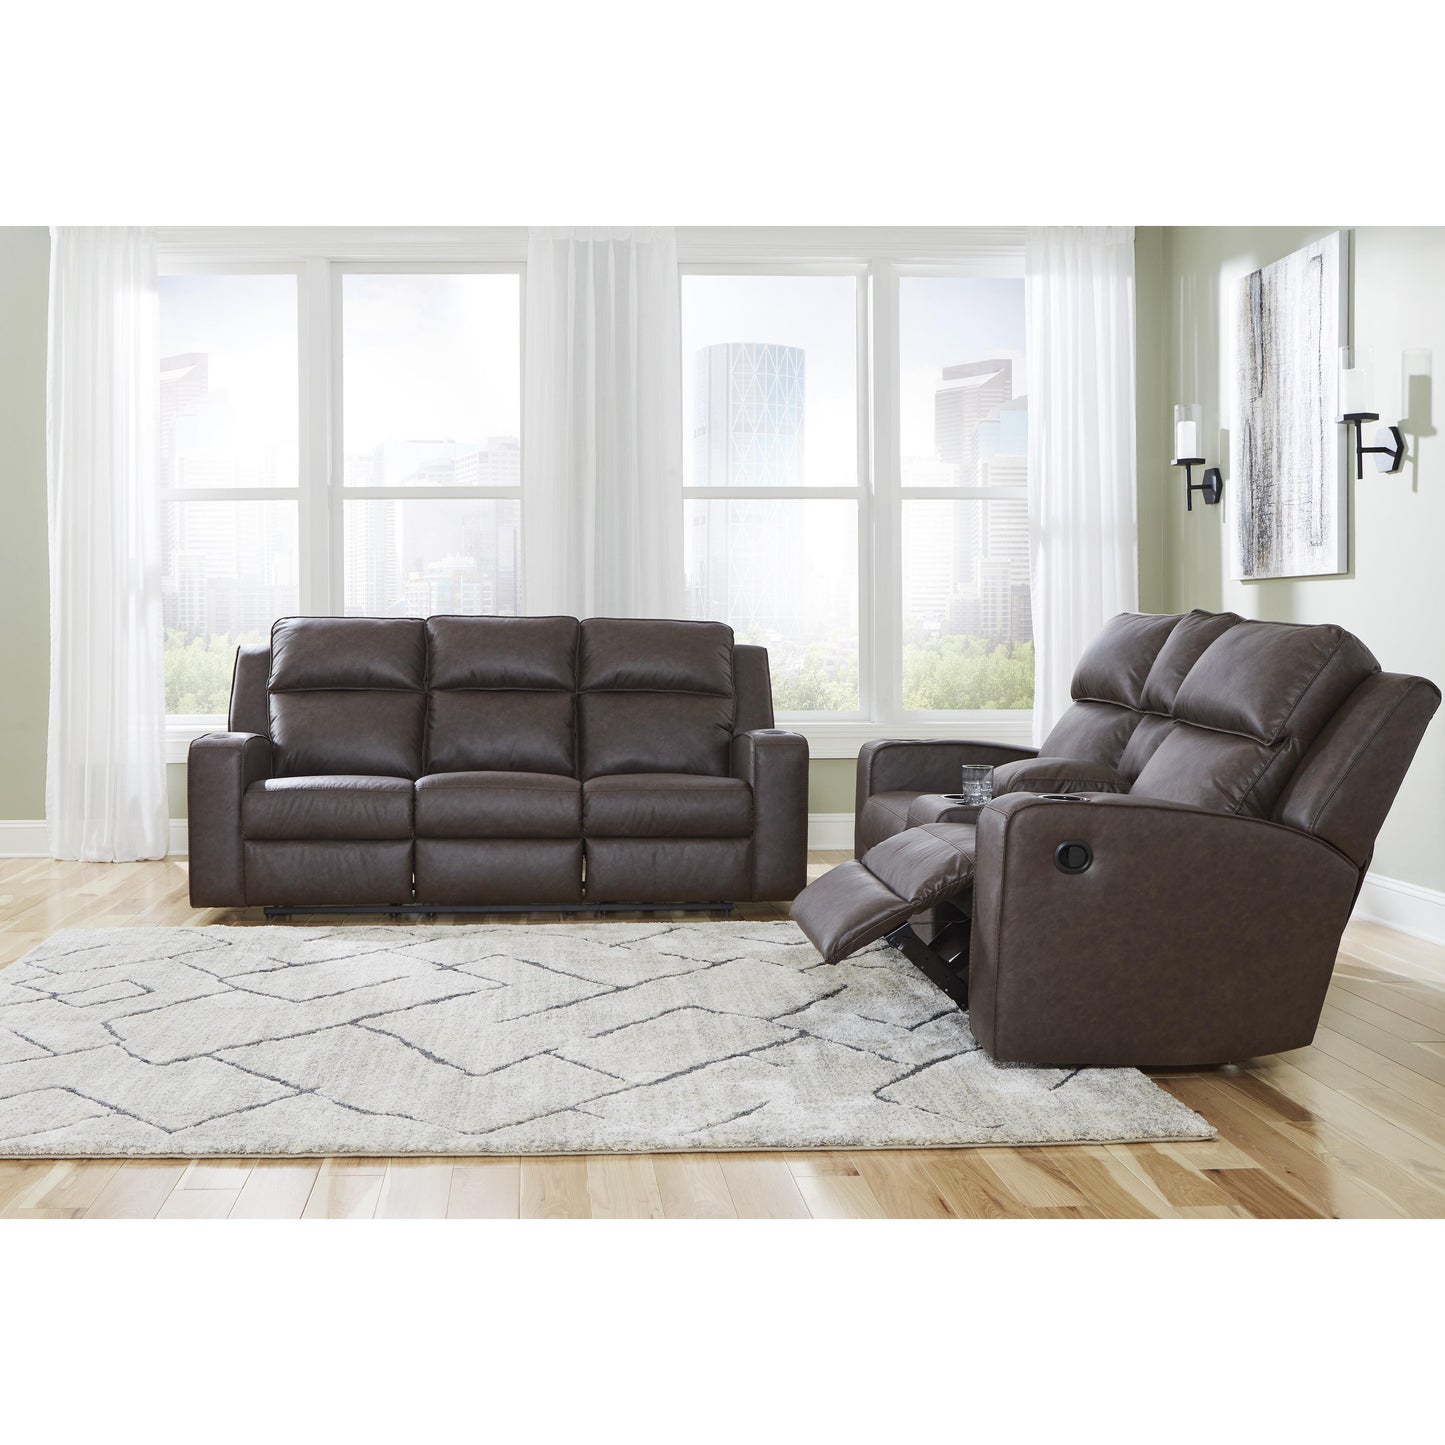 Signature Design by Ashley Lavenhorne Reclining Leather Look Loveseat 6330694 IMAGE 8